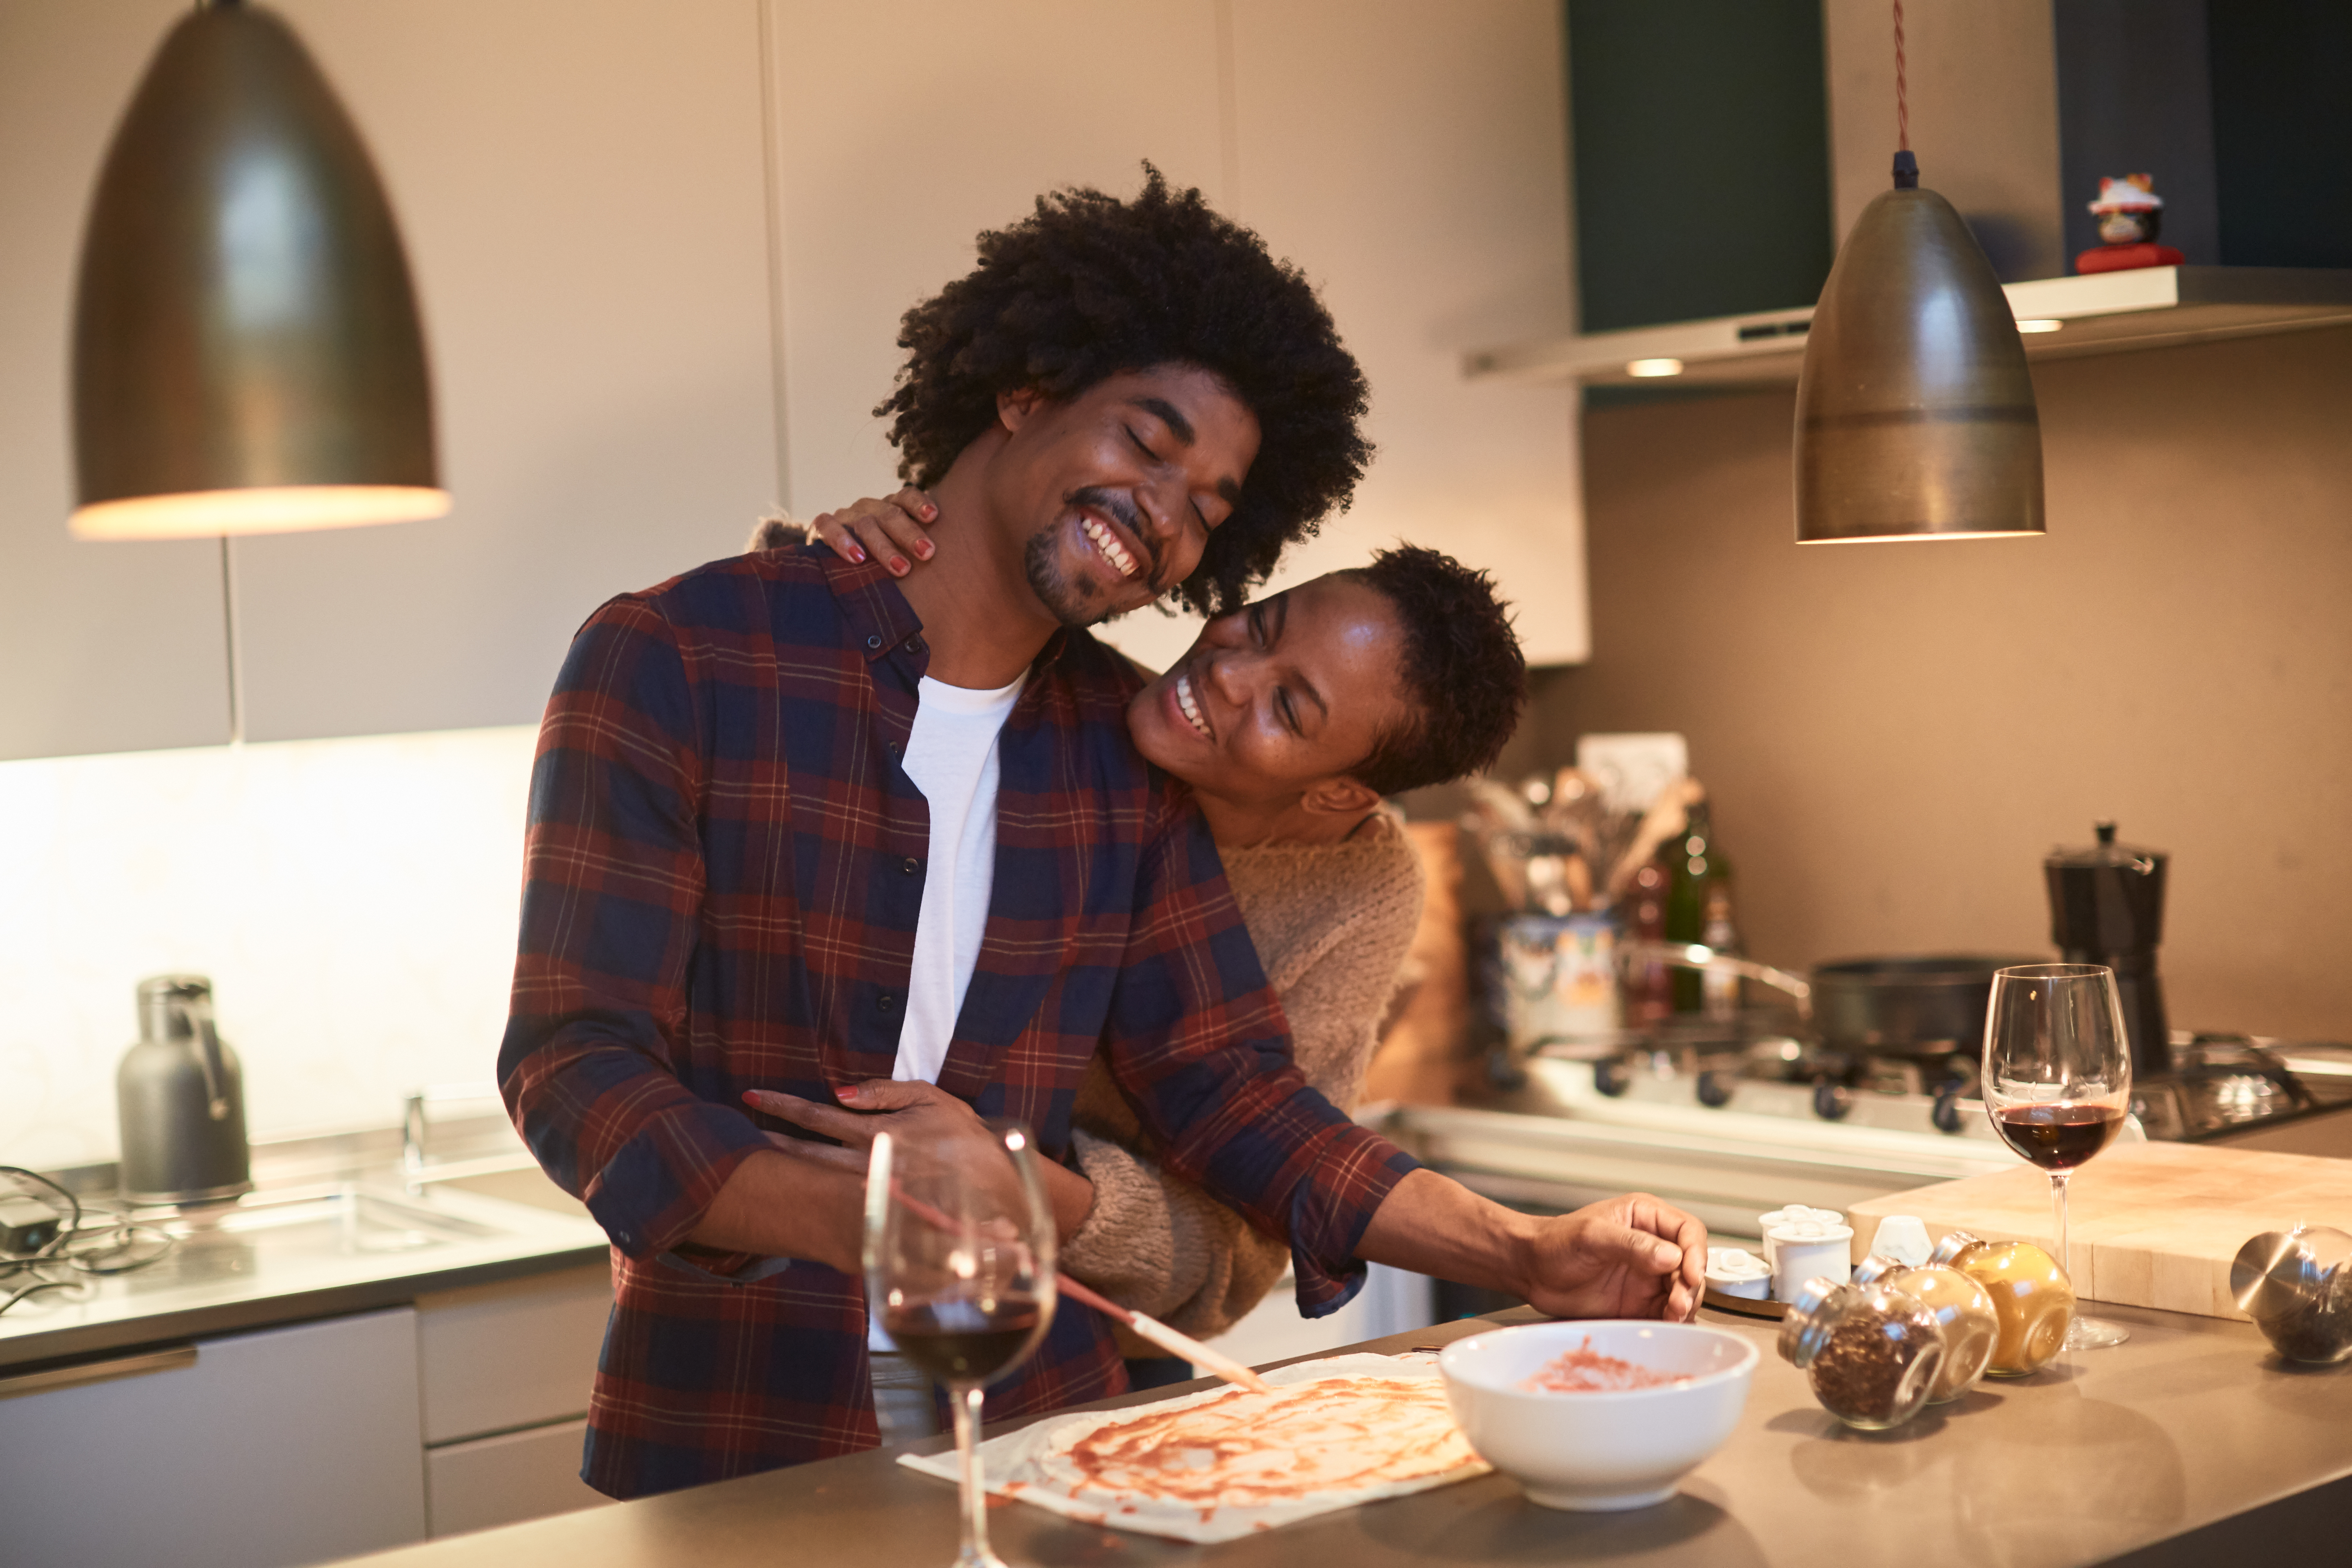 Young couple cooking at home and celebrating Saint Valentine | Source: Getty Images